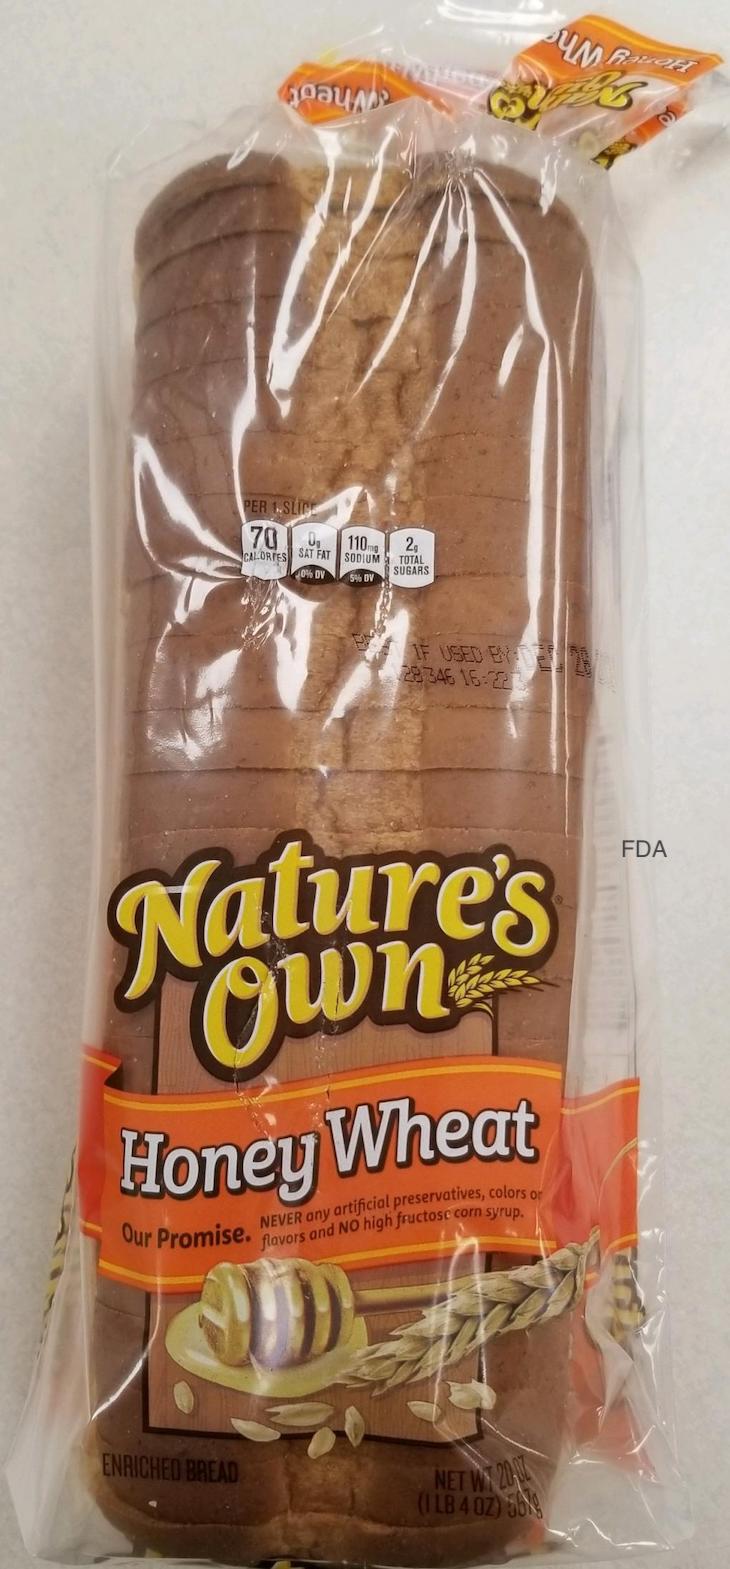 Nature's Own Honey Wheat Bread Recalled For Undeclared Milk